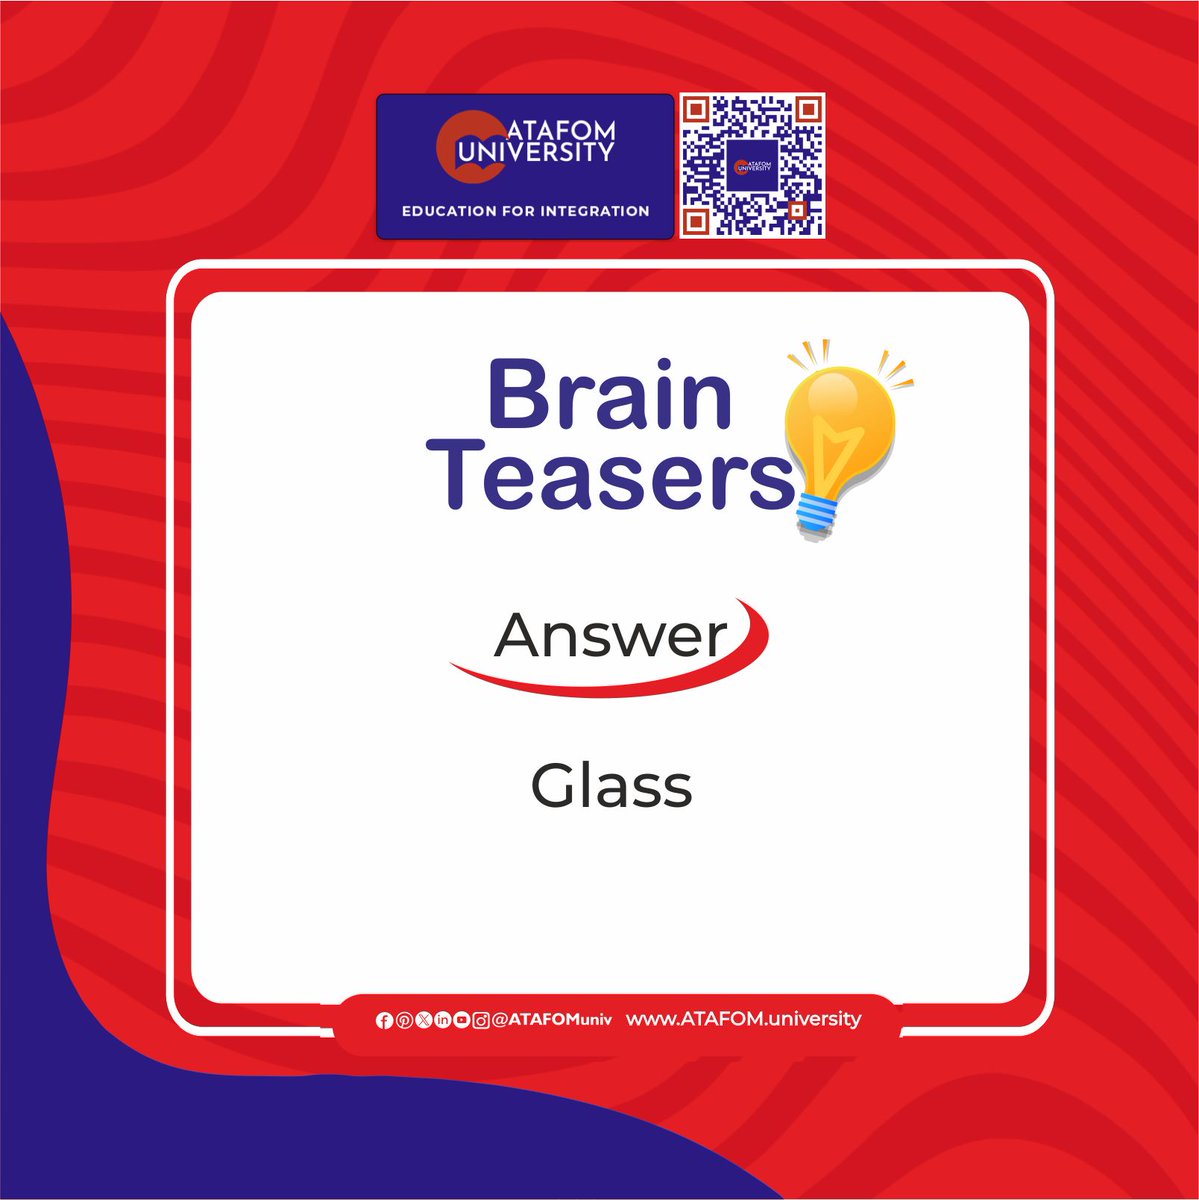 Exercise your mind with our latest brain teaser challenge!
Can you solve it? 
Test your wits and sharpen your cognitive skills with ATAFOM University. 

#BrainTeaser #MindChallenge #PuzzleFun #CriticalThinking #BrainGames #UniversityLife #ATAFOMonlinecampus #Learning #Education…